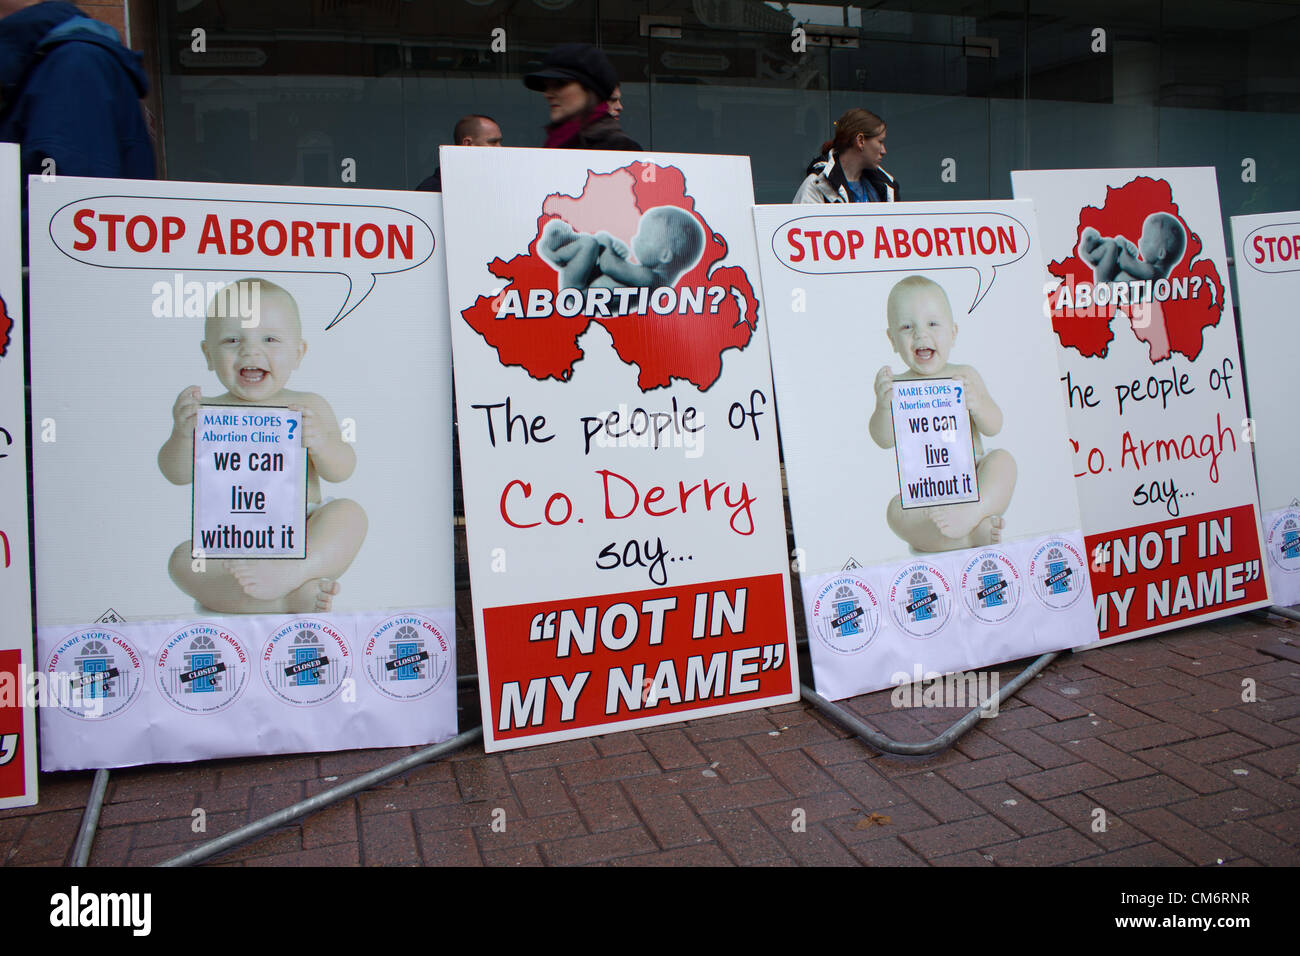 Belfast, UK. 18th October, 2012. Anti-abortion signs on show at the new Marie Stopes clinic in Belfast, the first private clinic in Northern ireland to offer abortions. The clinic, which opened today, offers abortions under the law in Northern Ireland. Stock Photo